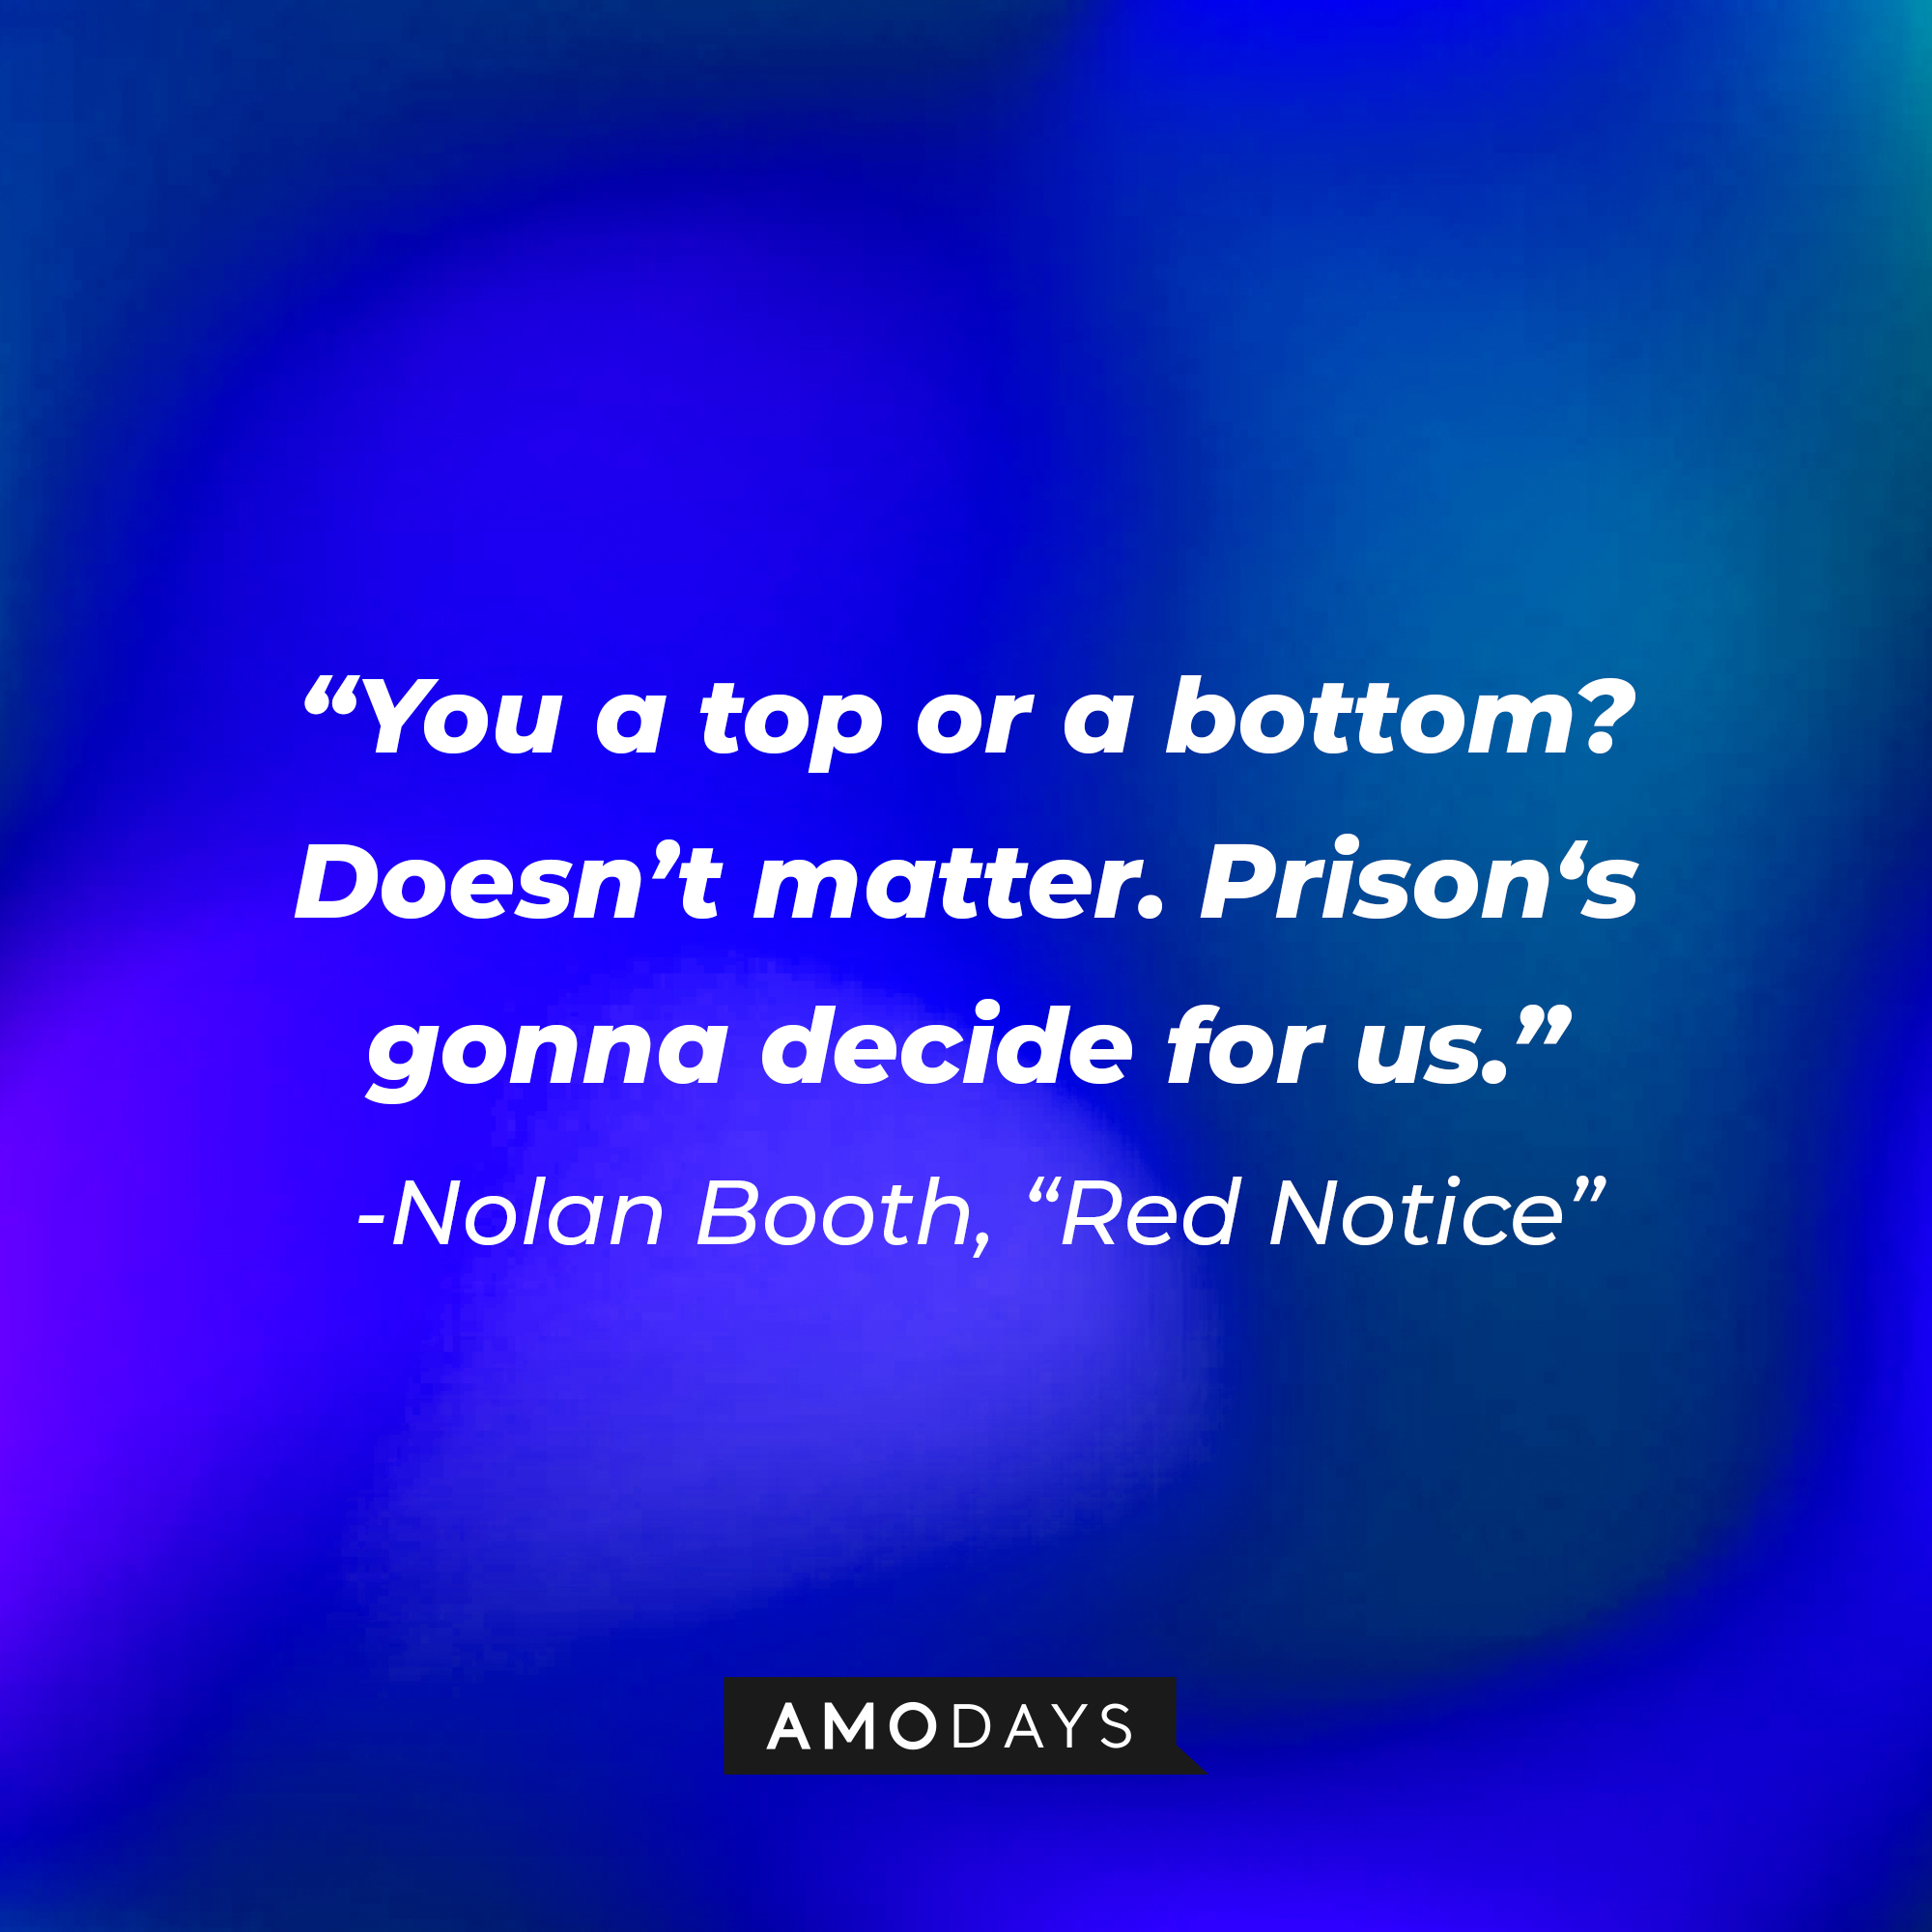 Nolan Booth's quote from "Red Notice:" “You a top or a bottom? Doesn’t matter. Prison‘s gonna decide for us.” | Source: AmoDays